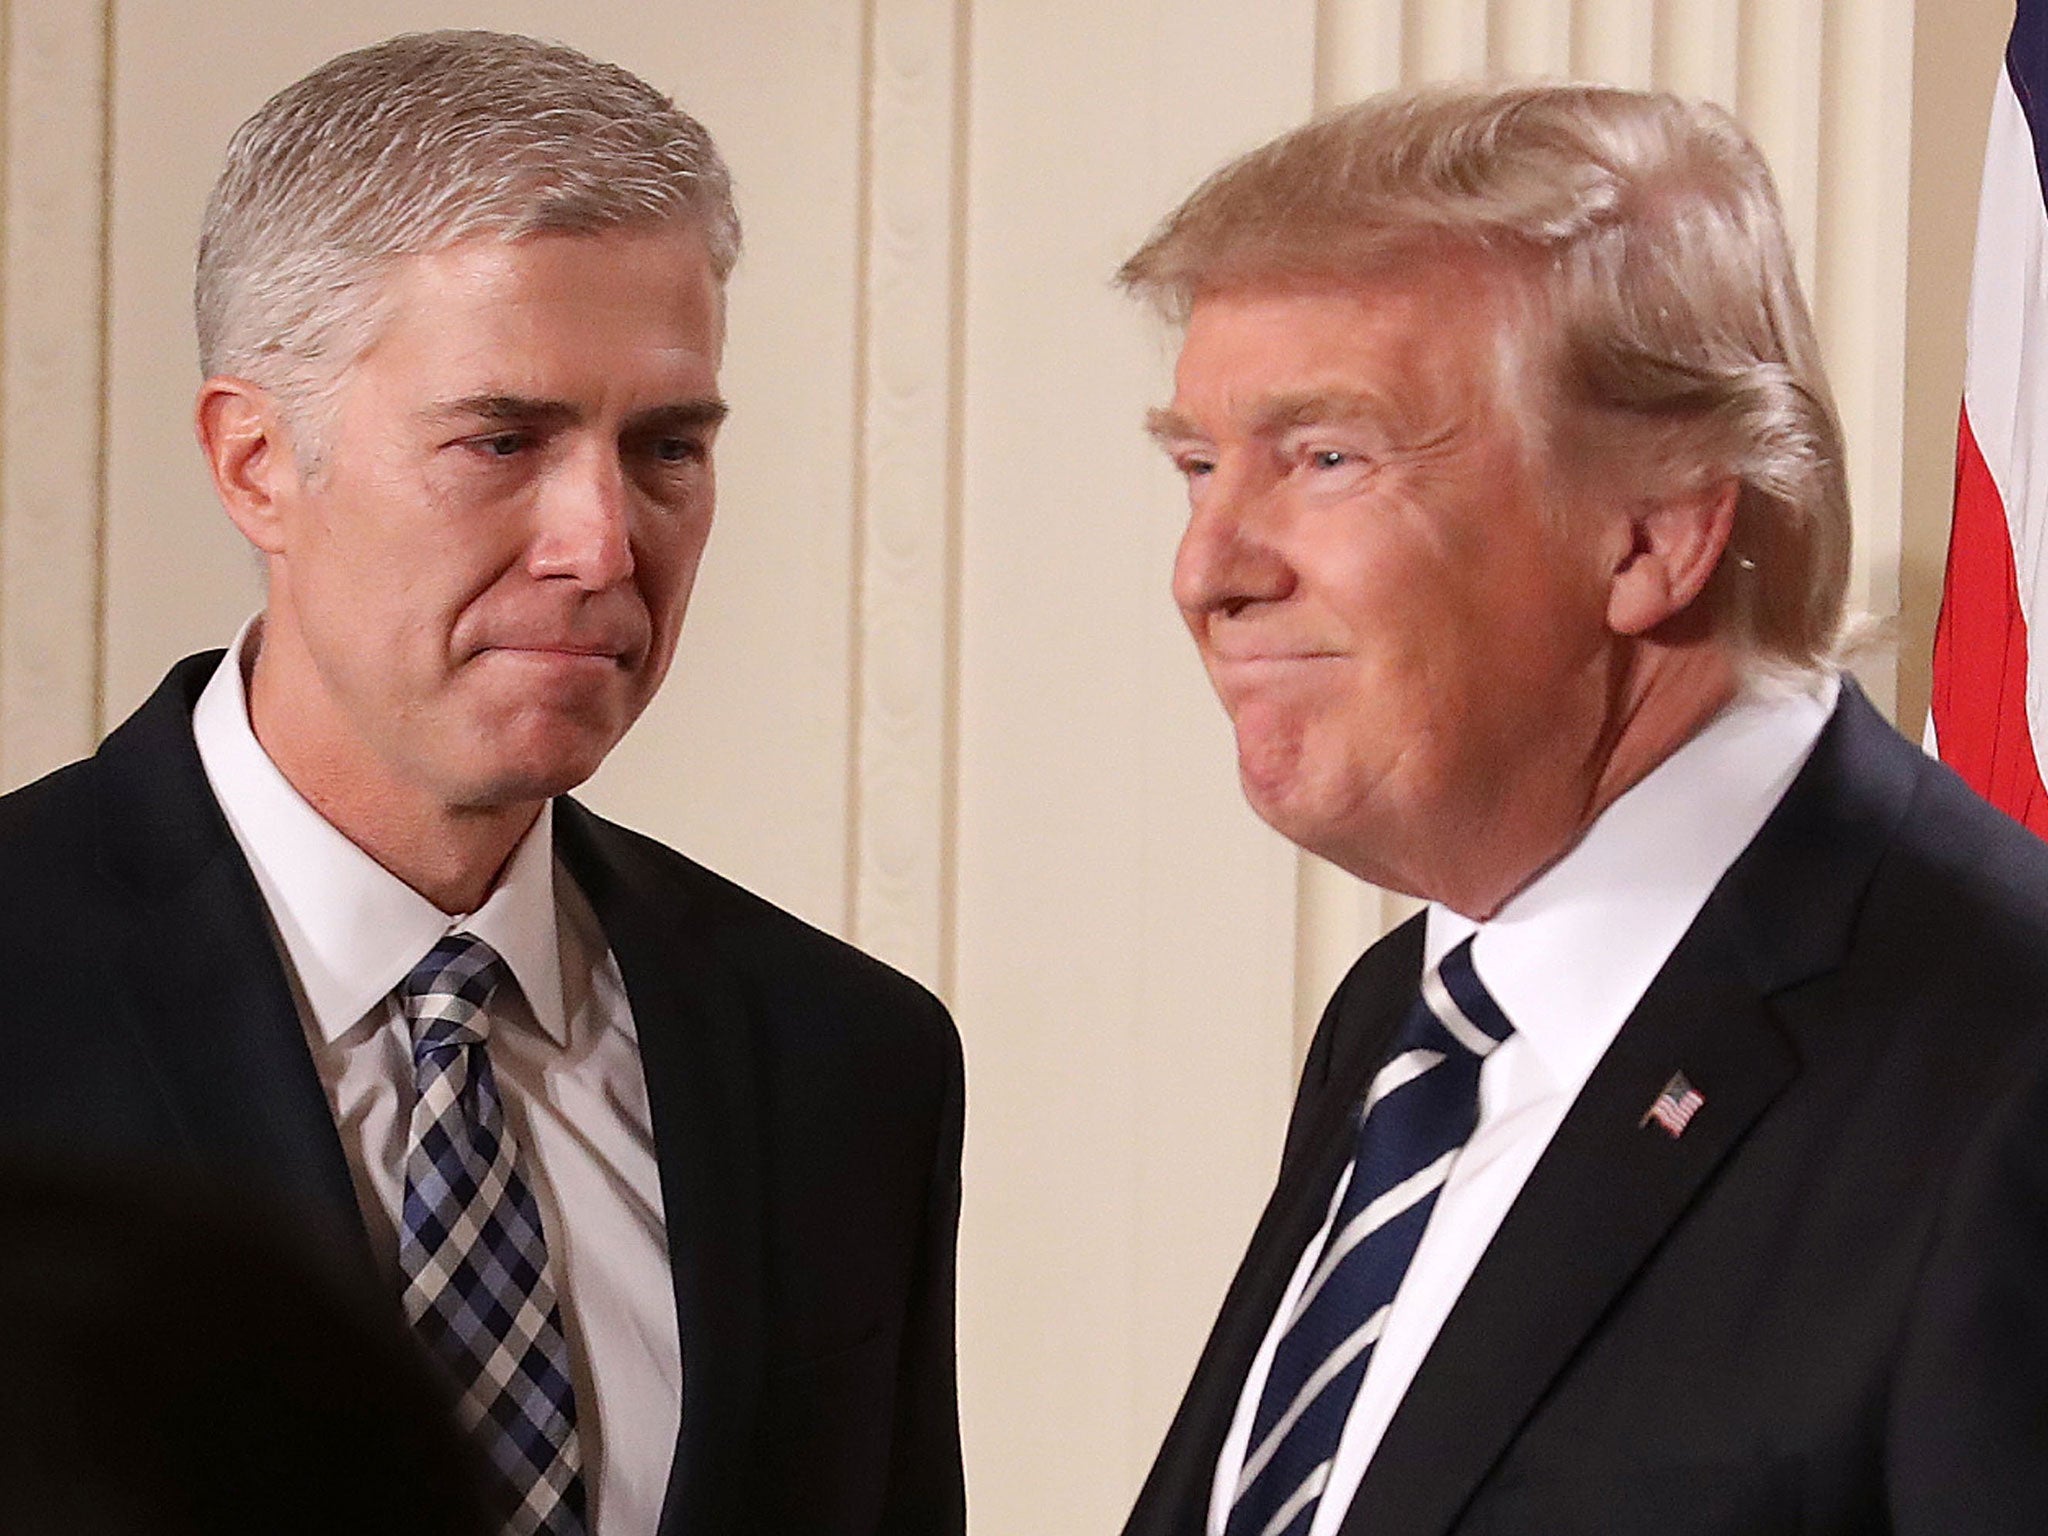 Mr Trump attacked the judiciary, and brushed off Mr Gorsuch's criticism